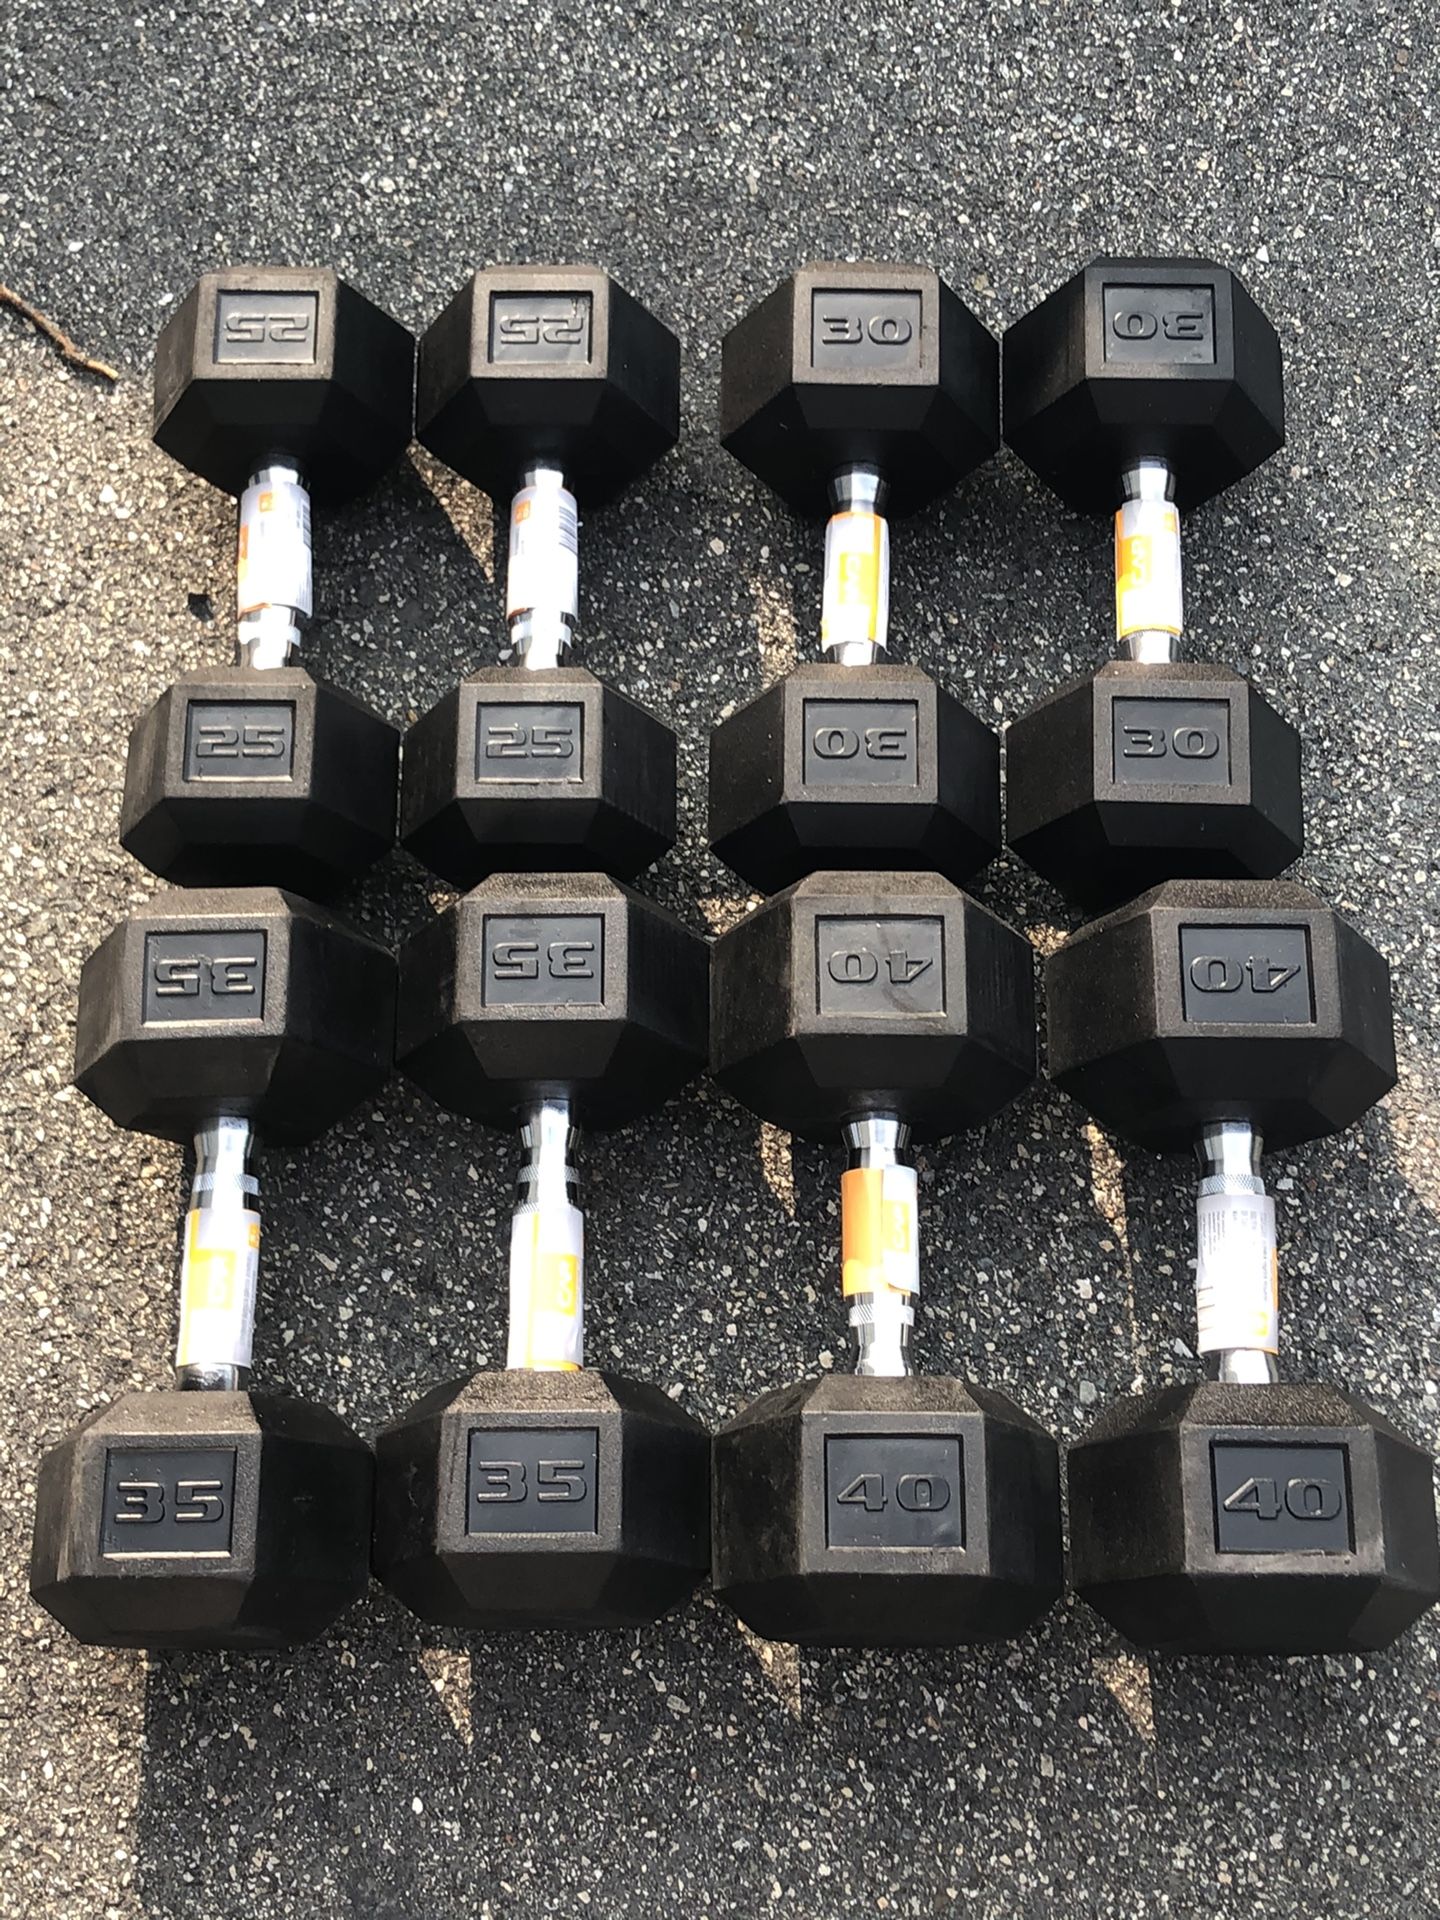 Dumbbell Set: 25,30,35, and 40 LB Pairs (260lb total)